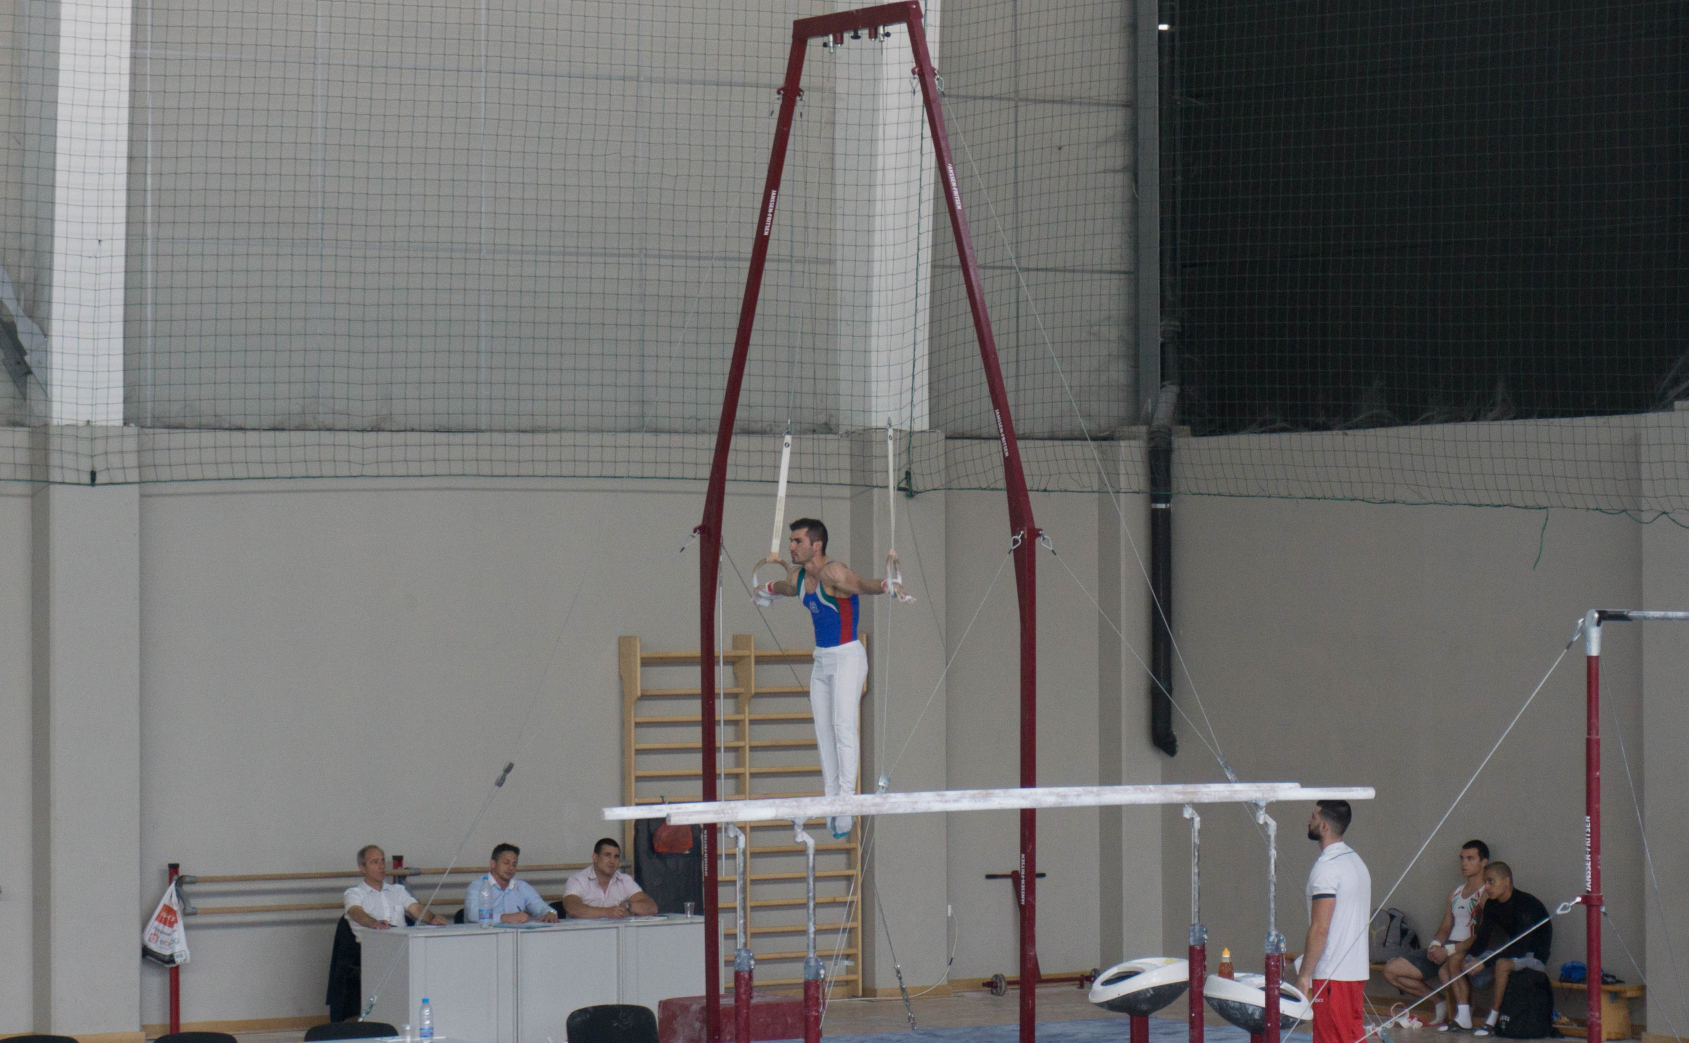 This is Stefan Kolimechkov performing the iron cross on Rings at the National Championships in 2016